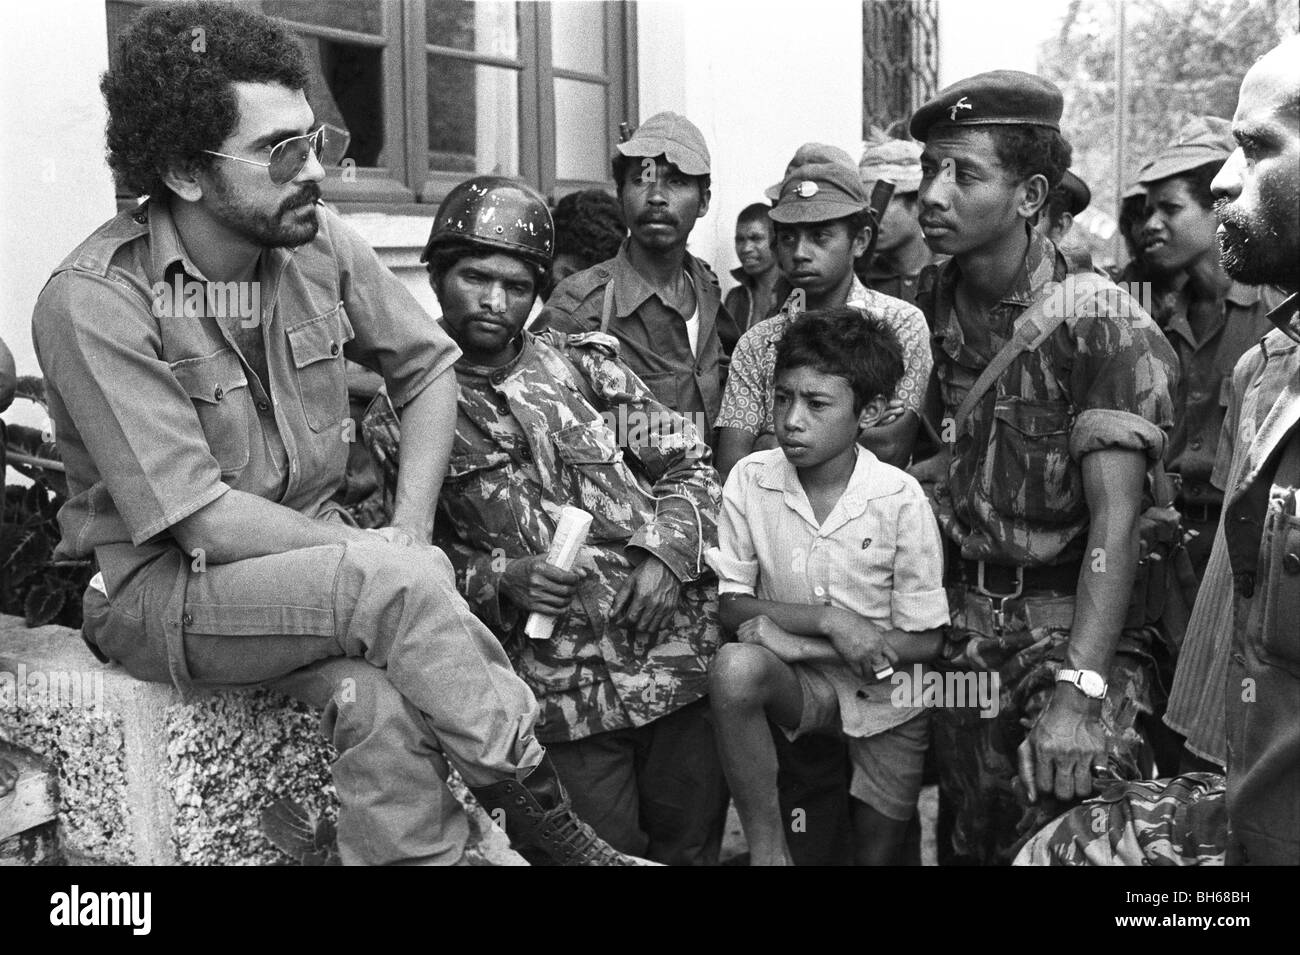 Jose Ramos-Horta with Fretilin at Batugade on border of East Timor where Indonesian forces invading. October 1975 Stock Photo